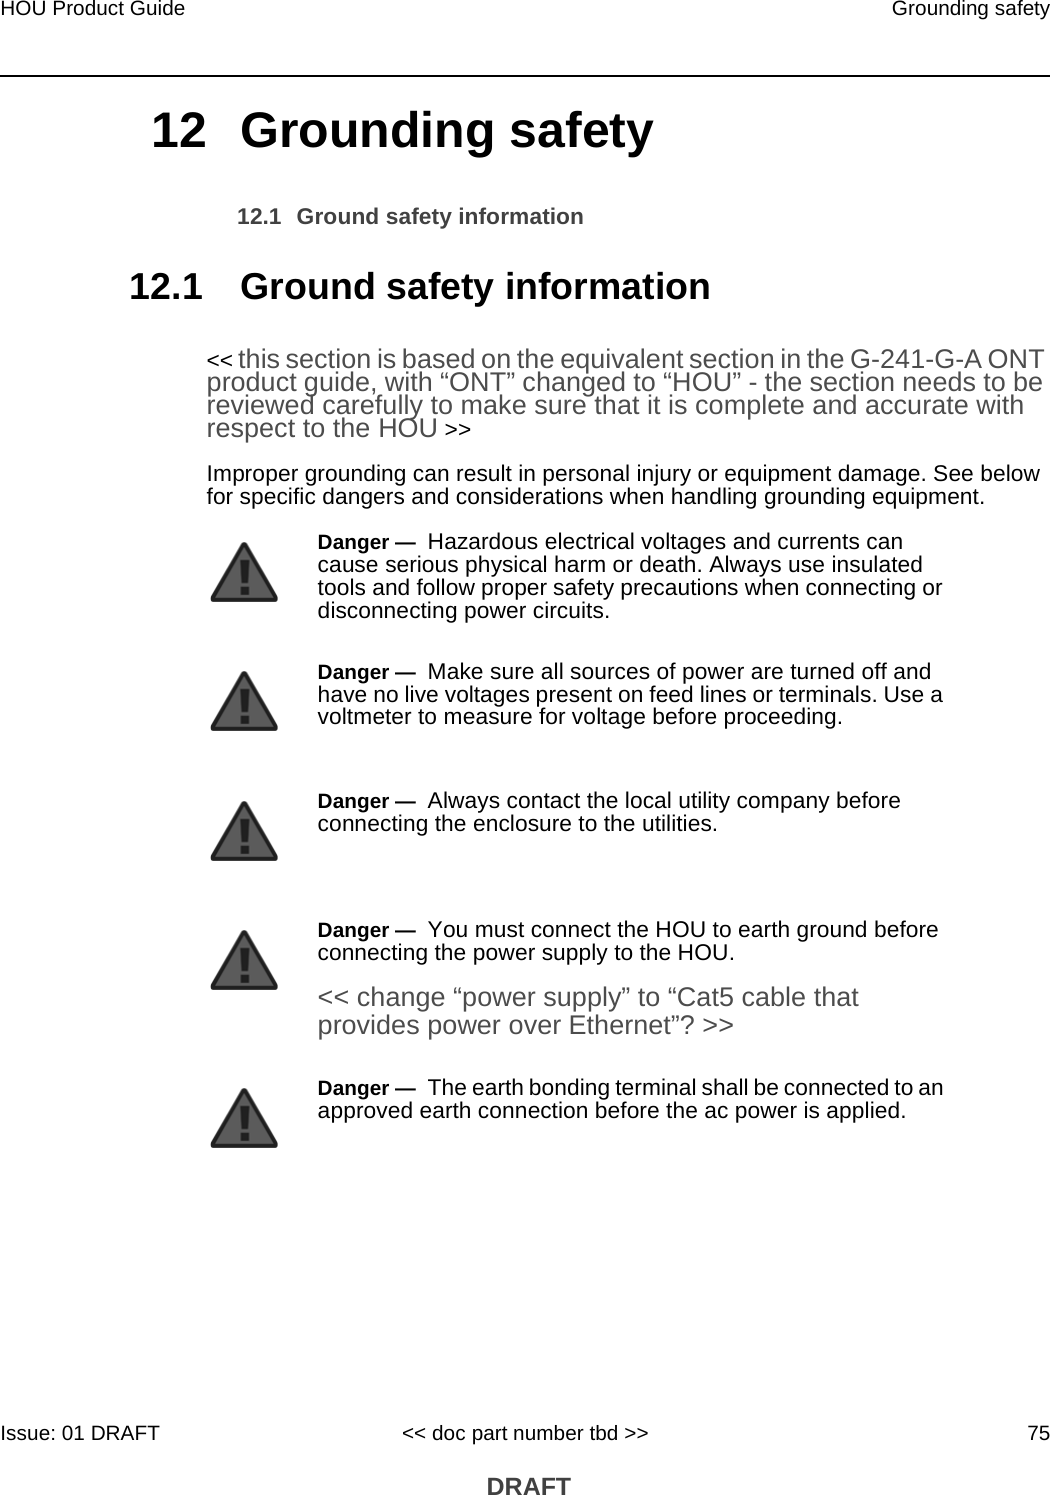 HOU Product Guide Grounding safetyIssue: 01 DRAFT &lt;&lt; doc part number tbd &gt;&gt; 75 DRAFT12 Grounding safety12.1 Ground safety information12.1 Ground safety information&lt;&lt; this section is based on the equivalent section in the G-241-G-A ONT product guide, with “ONT” changed to “HOU” - the section needs to be reviewed carefully to make sure that it is complete and accurate with respect to the HOU &gt;&gt;Improper grounding can result in personal injury or equipment damage. See below for specific dangers and considerations when handling grounding equipment.Danger —  Hazardous electrical voltages and currents can cause serious physical harm or death. Always use insulated tools and follow proper safety precautions when connecting or disconnecting power circuits. Danger —  Make sure all sources of power are turned off and have no live voltages present on feed lines or terminals. Use a voltmeter to measure for voltage before proceeding.Danger —  Always contact the local utility company before connecting the enclosure to the utilities.Danger —  You must connect the HOU to earth ground before connecting the power supply to the HOU.&lt;&lt; change “power supply” to “Cat5 cable that provides power over Ethernet”? &gt;&gt;Danger —  The earth bonding terminal shall be connected to an approved earth connection before the ac power is applied. 